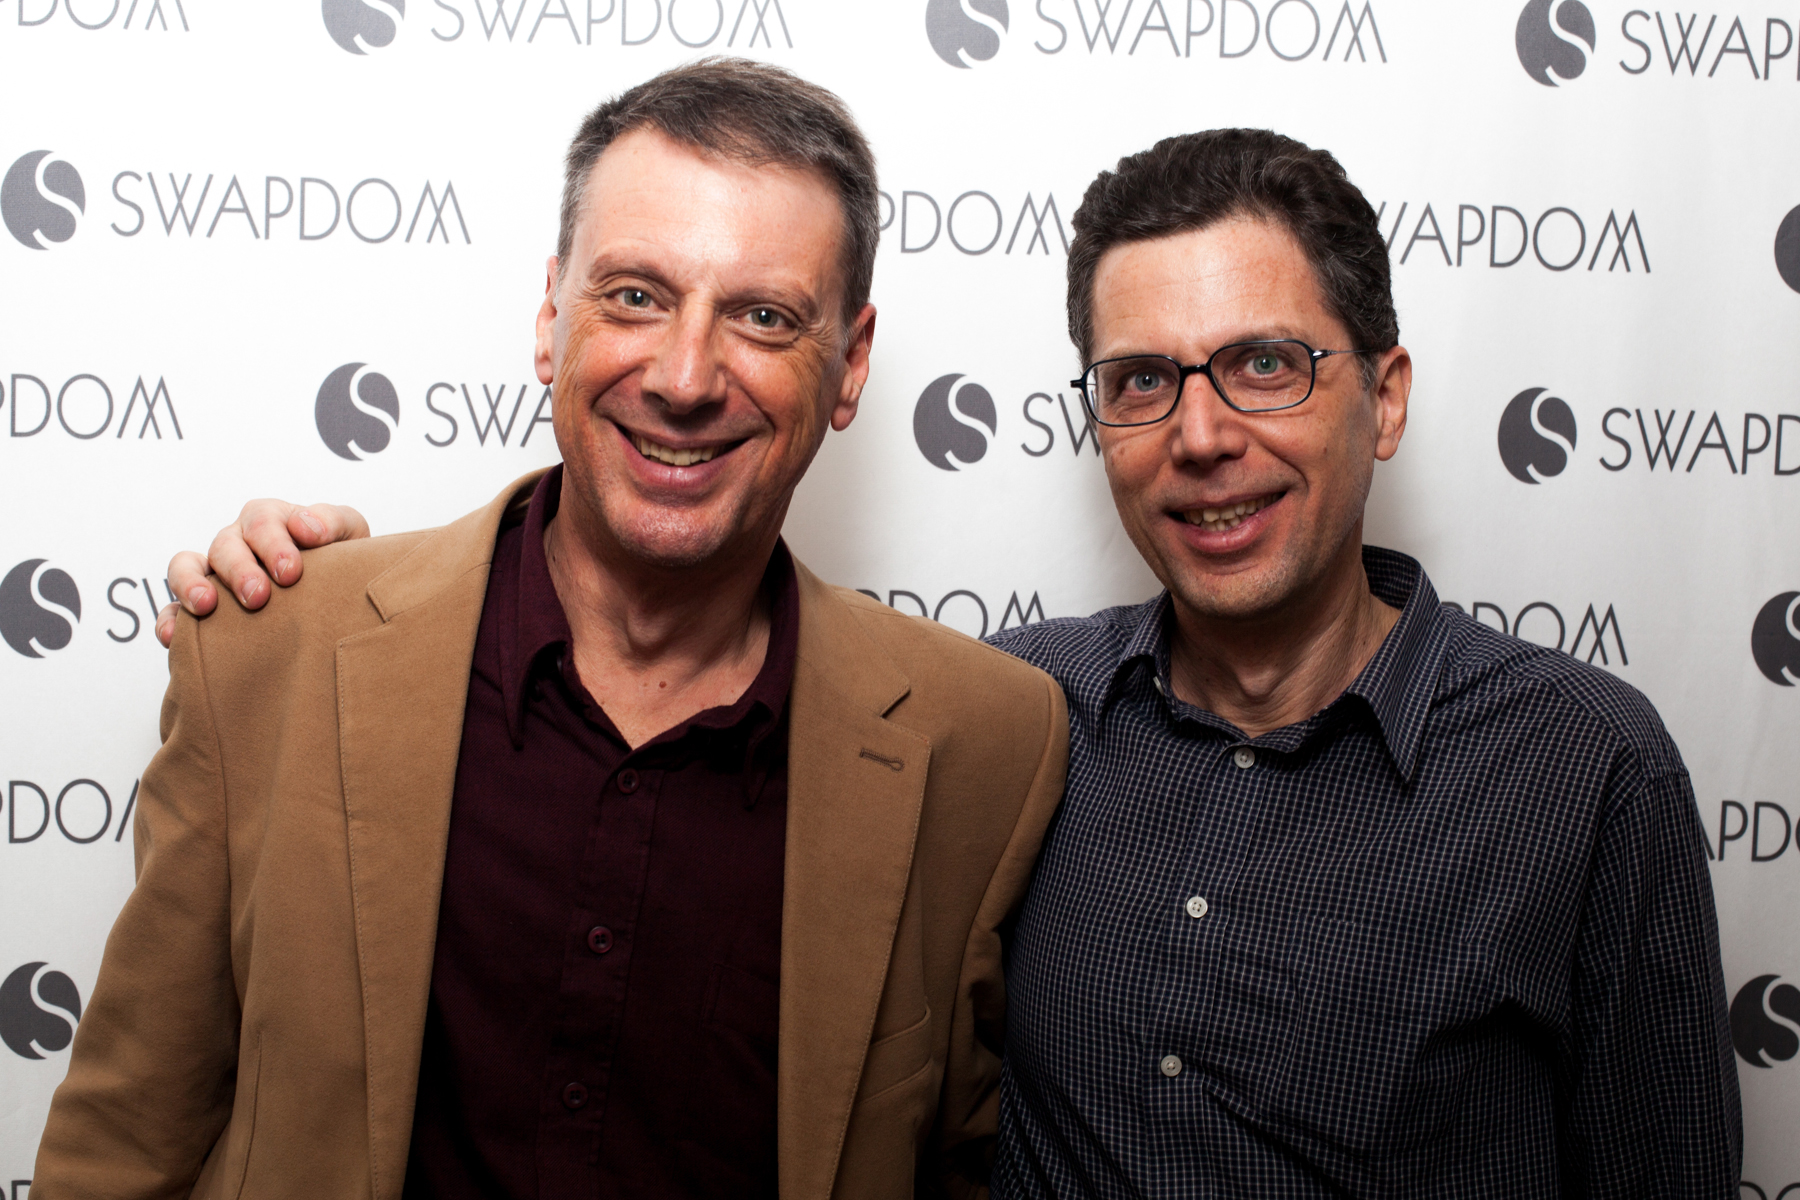 Swapdom founders